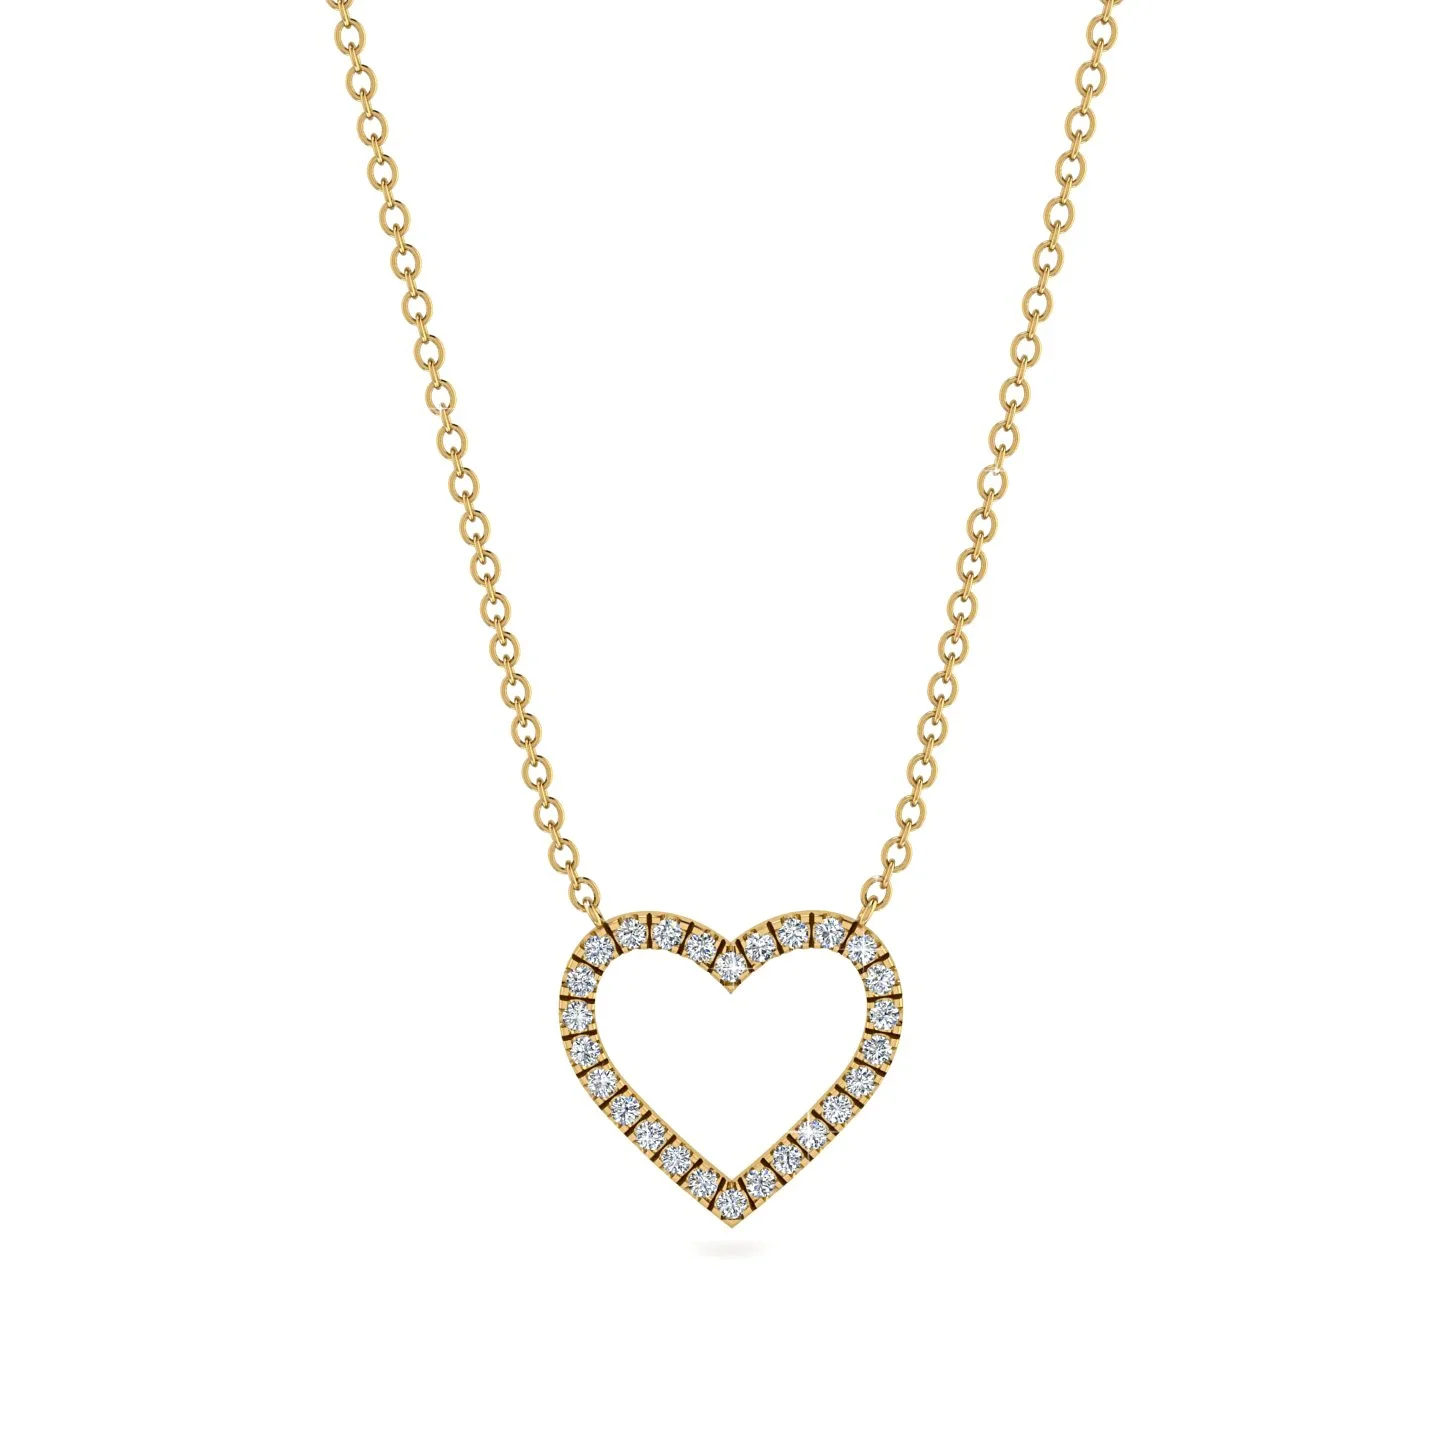 Image of Heart Shaped Diamond Necklace - Marie No. 1